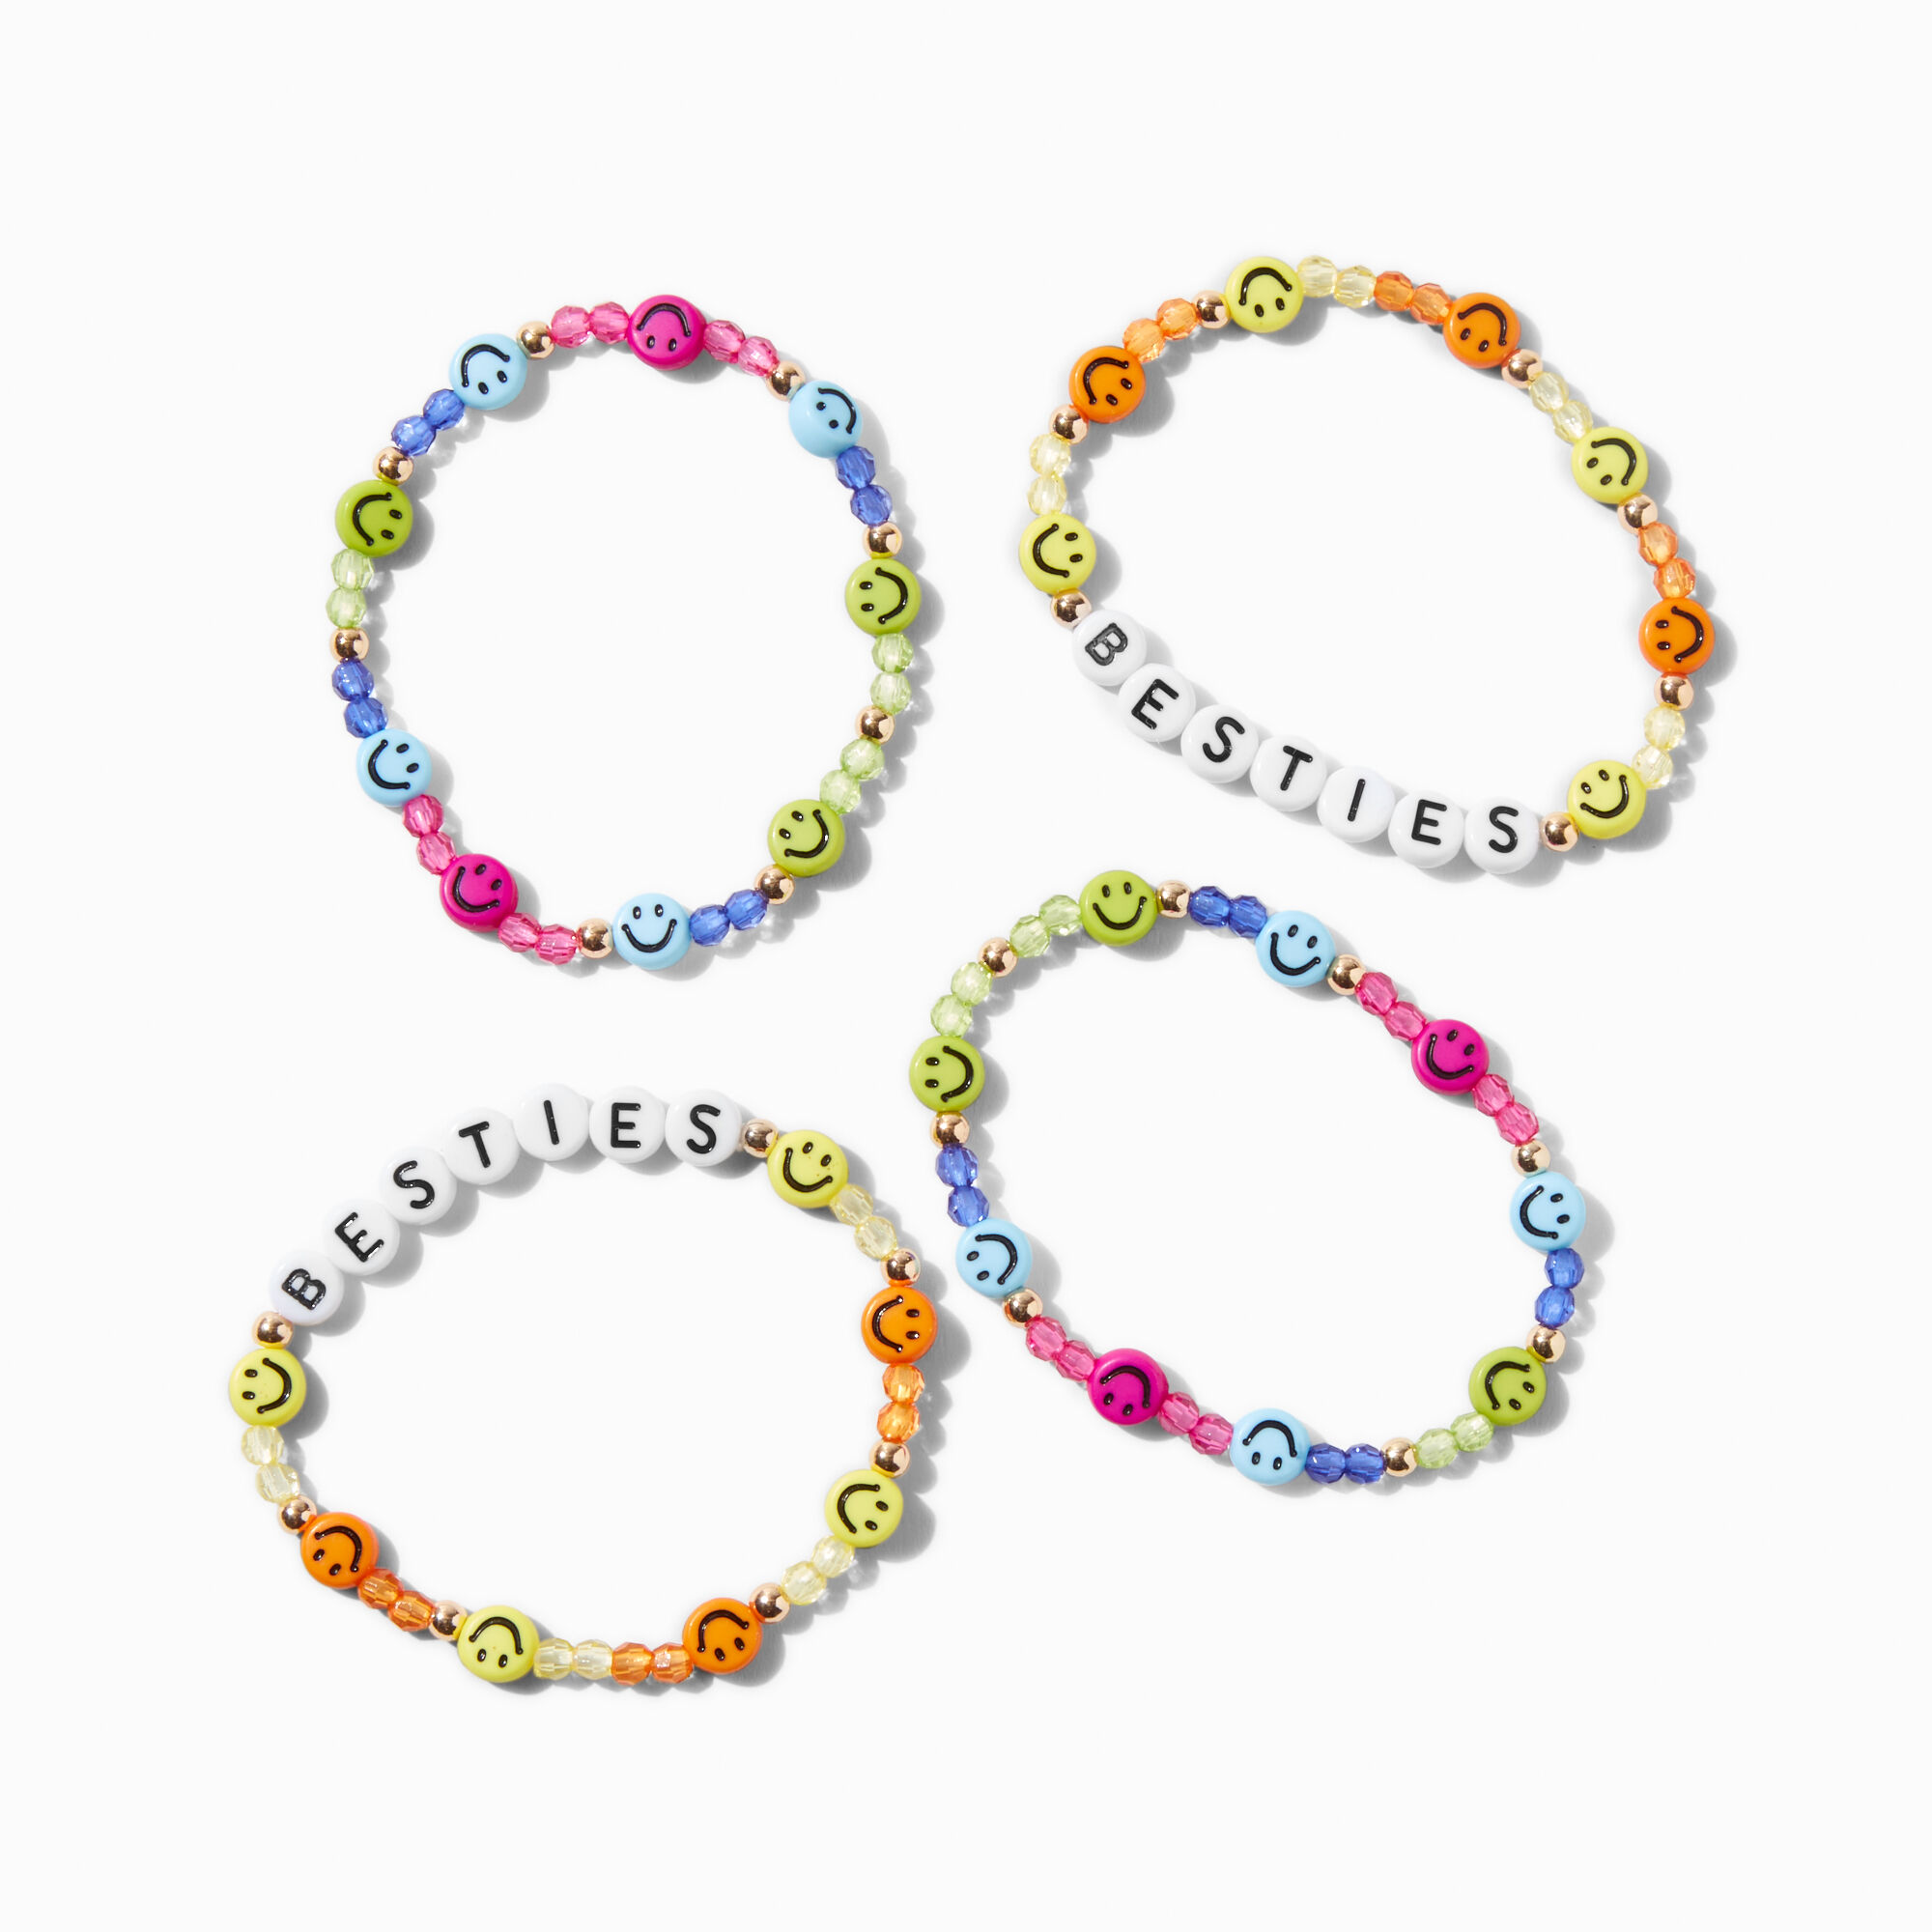 View Claires Best Friends Happy Face Beaded Stretch Bracelets 2 Pack information